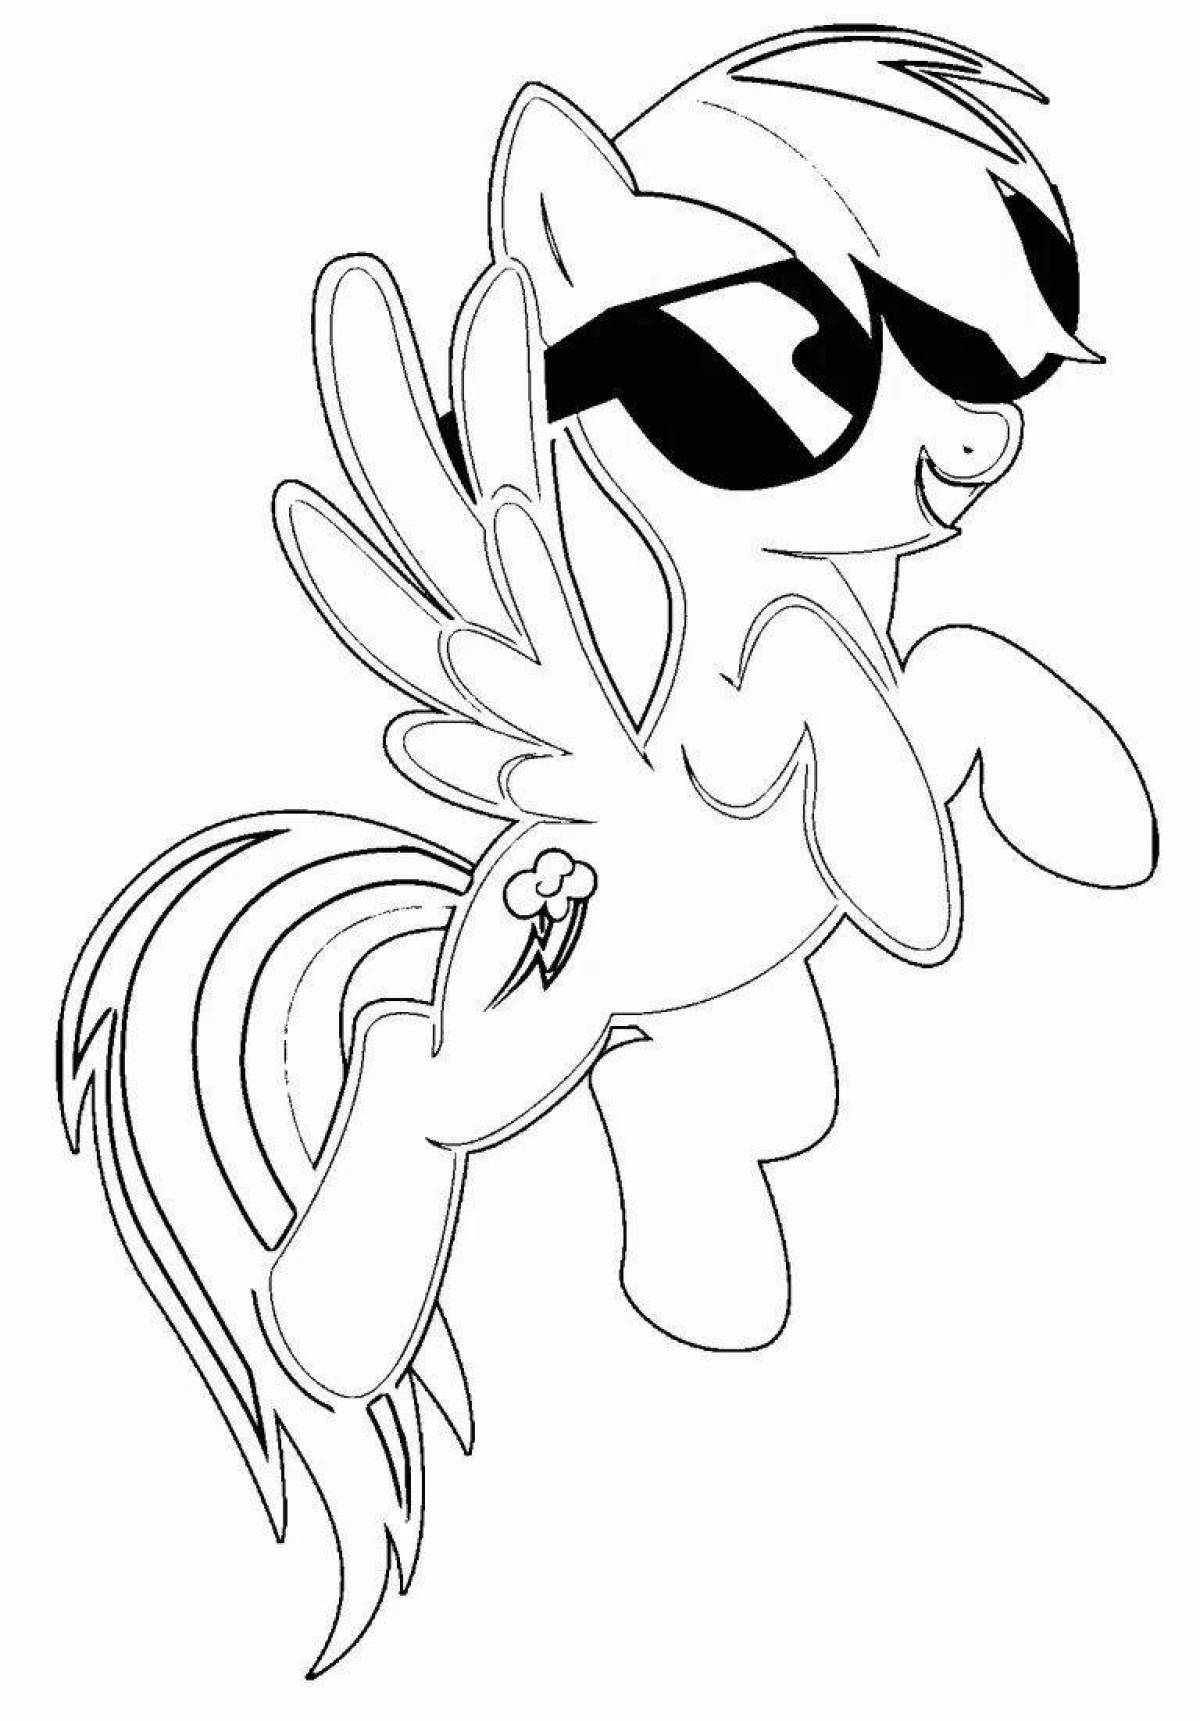 Animated rainbow dash coloring page